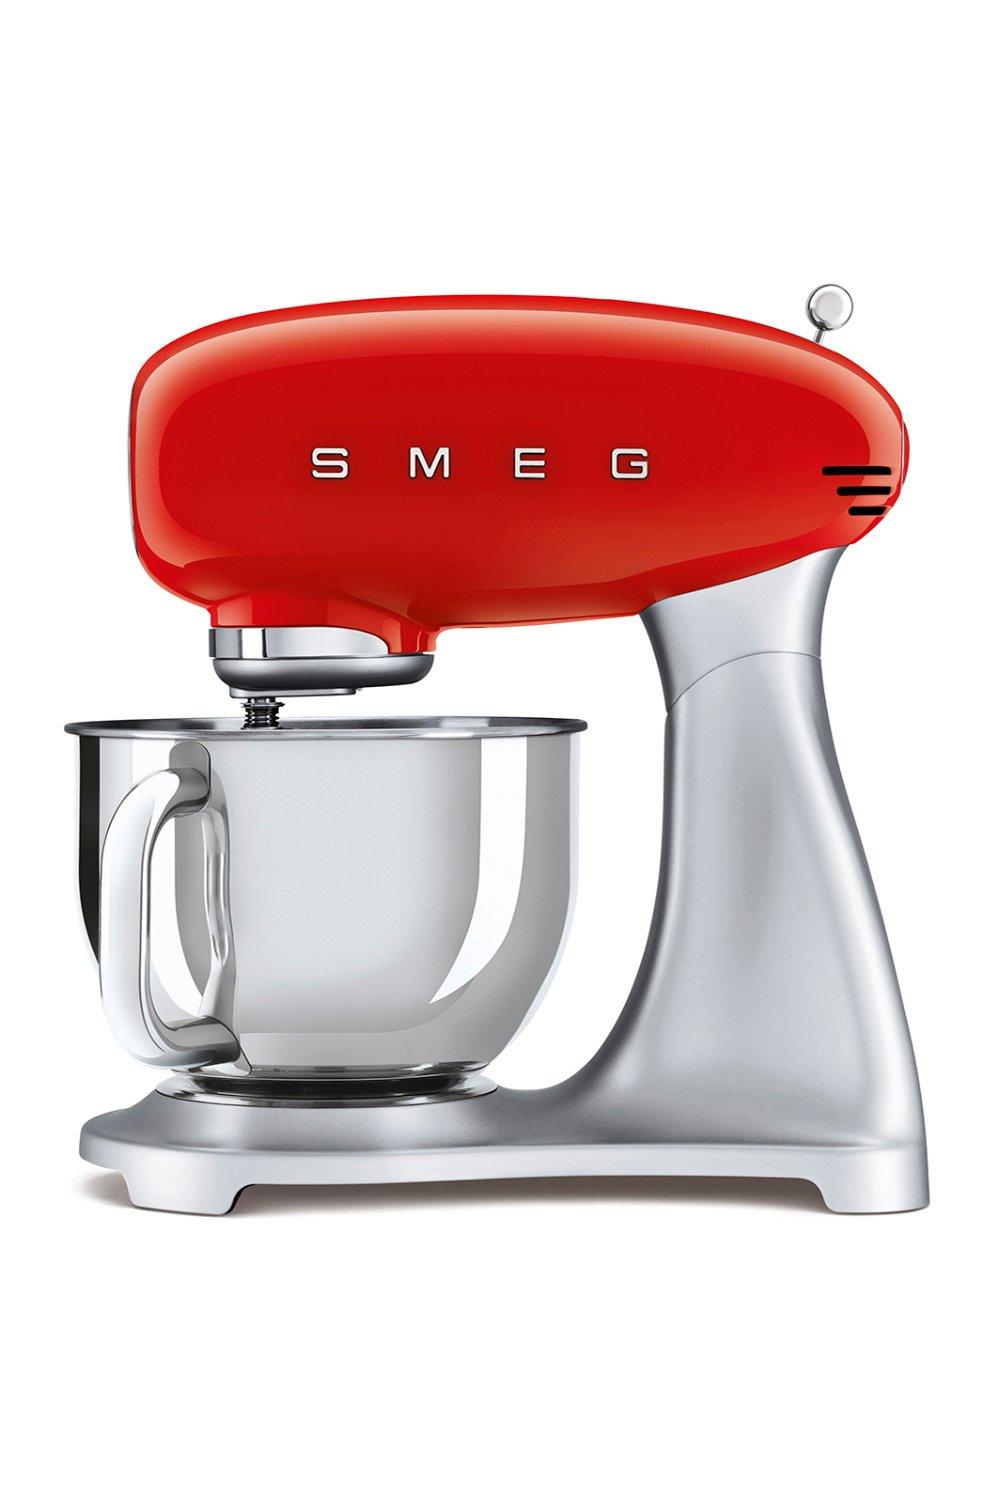 Smeg SMF02RDUK Stand Mixer with 4.8 Litre Bowl - Red